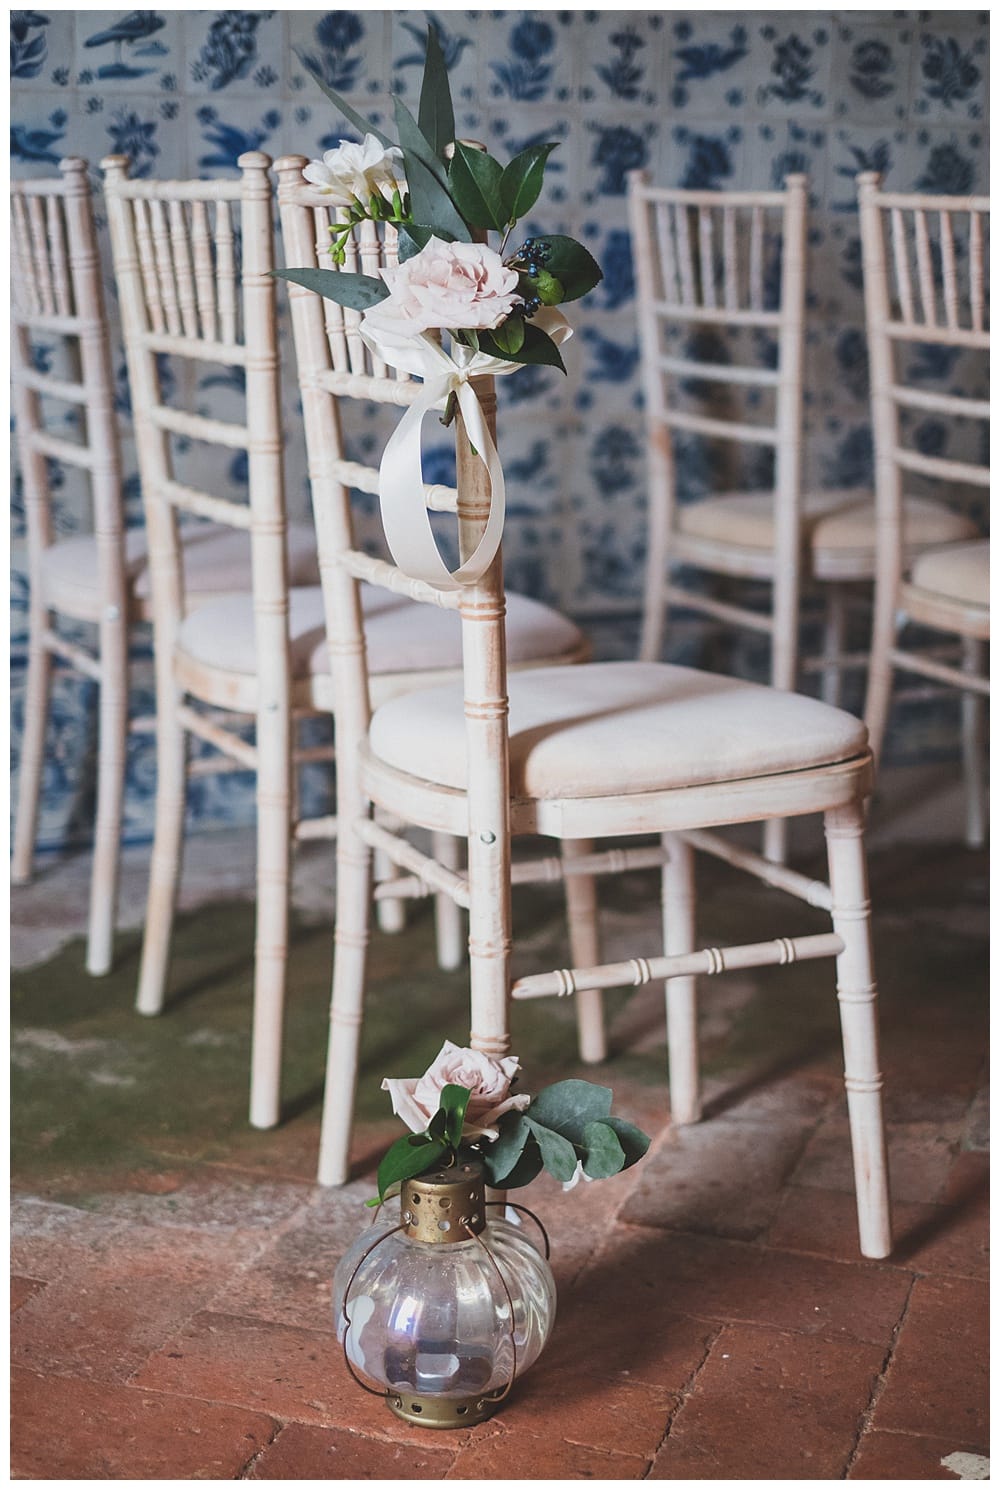 wedding flowers at old chapel with tiles in the Quinta Vintage #tiles #flowers #flowerdecoration #sintrawedding #rainywedding #quintamyvintagewedding